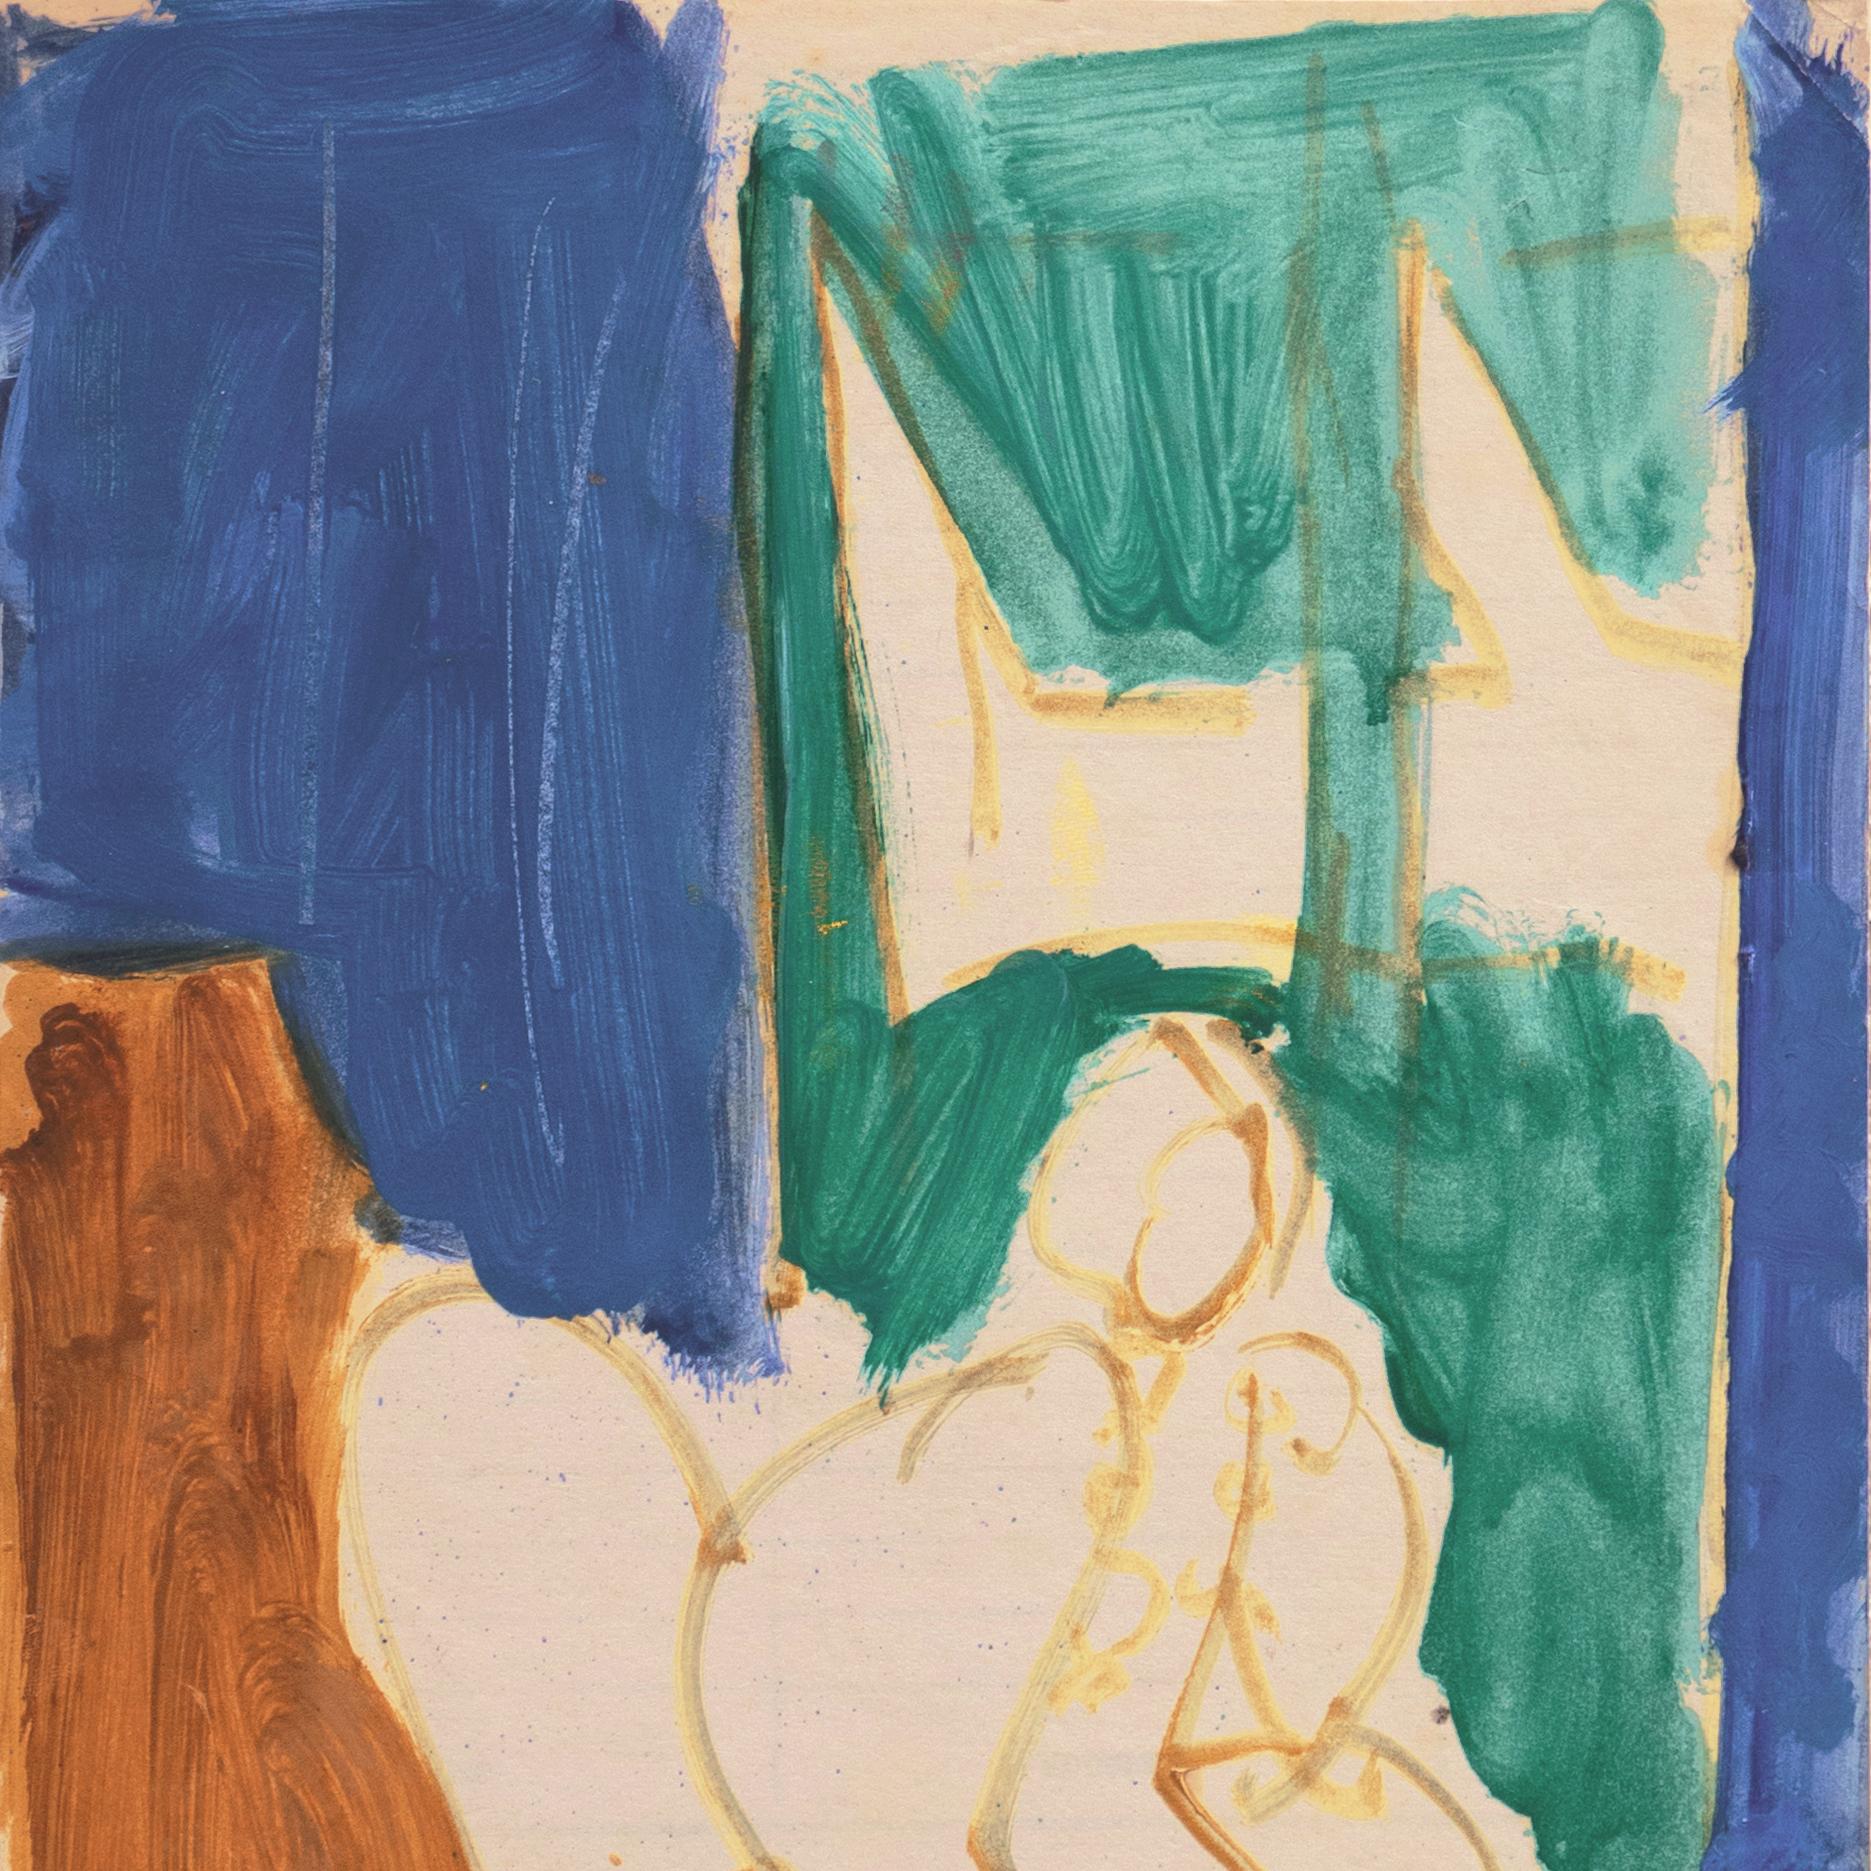 Stamped, verso, with estate stamp for Victor Di Gesu (American, 1914-1988) and created circa 1950.

A loose study of a woman seated in a dress, resting her chin on her hand and reclining on a sofa. The use of ochre, blue, and teal emphasize the